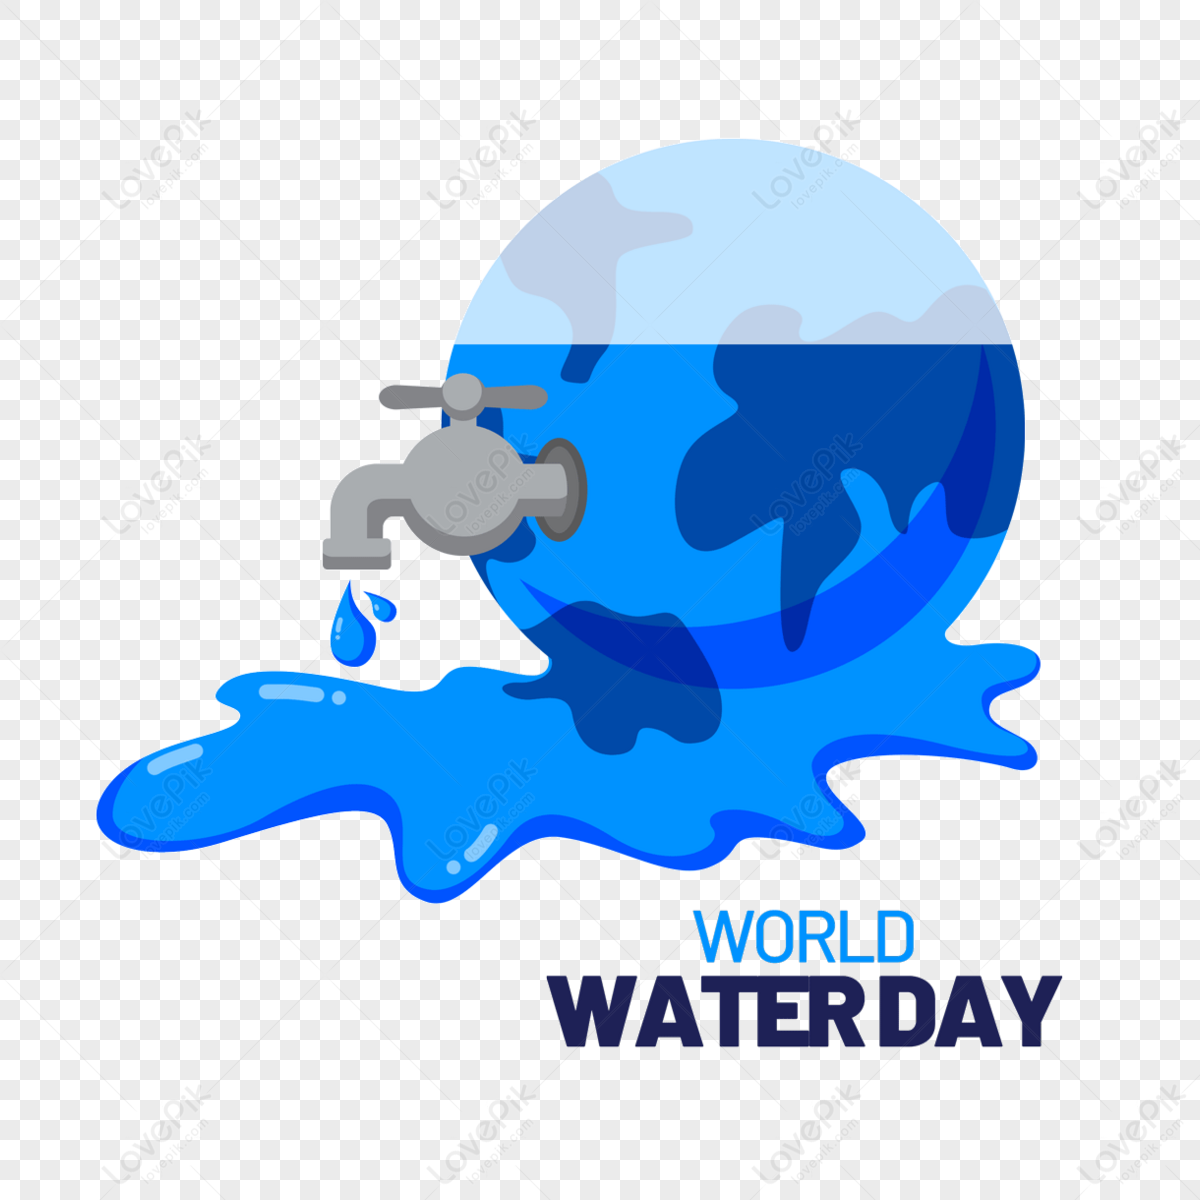 Illustration of hand saving water isolated on transparent background PNG -  Similar PNG